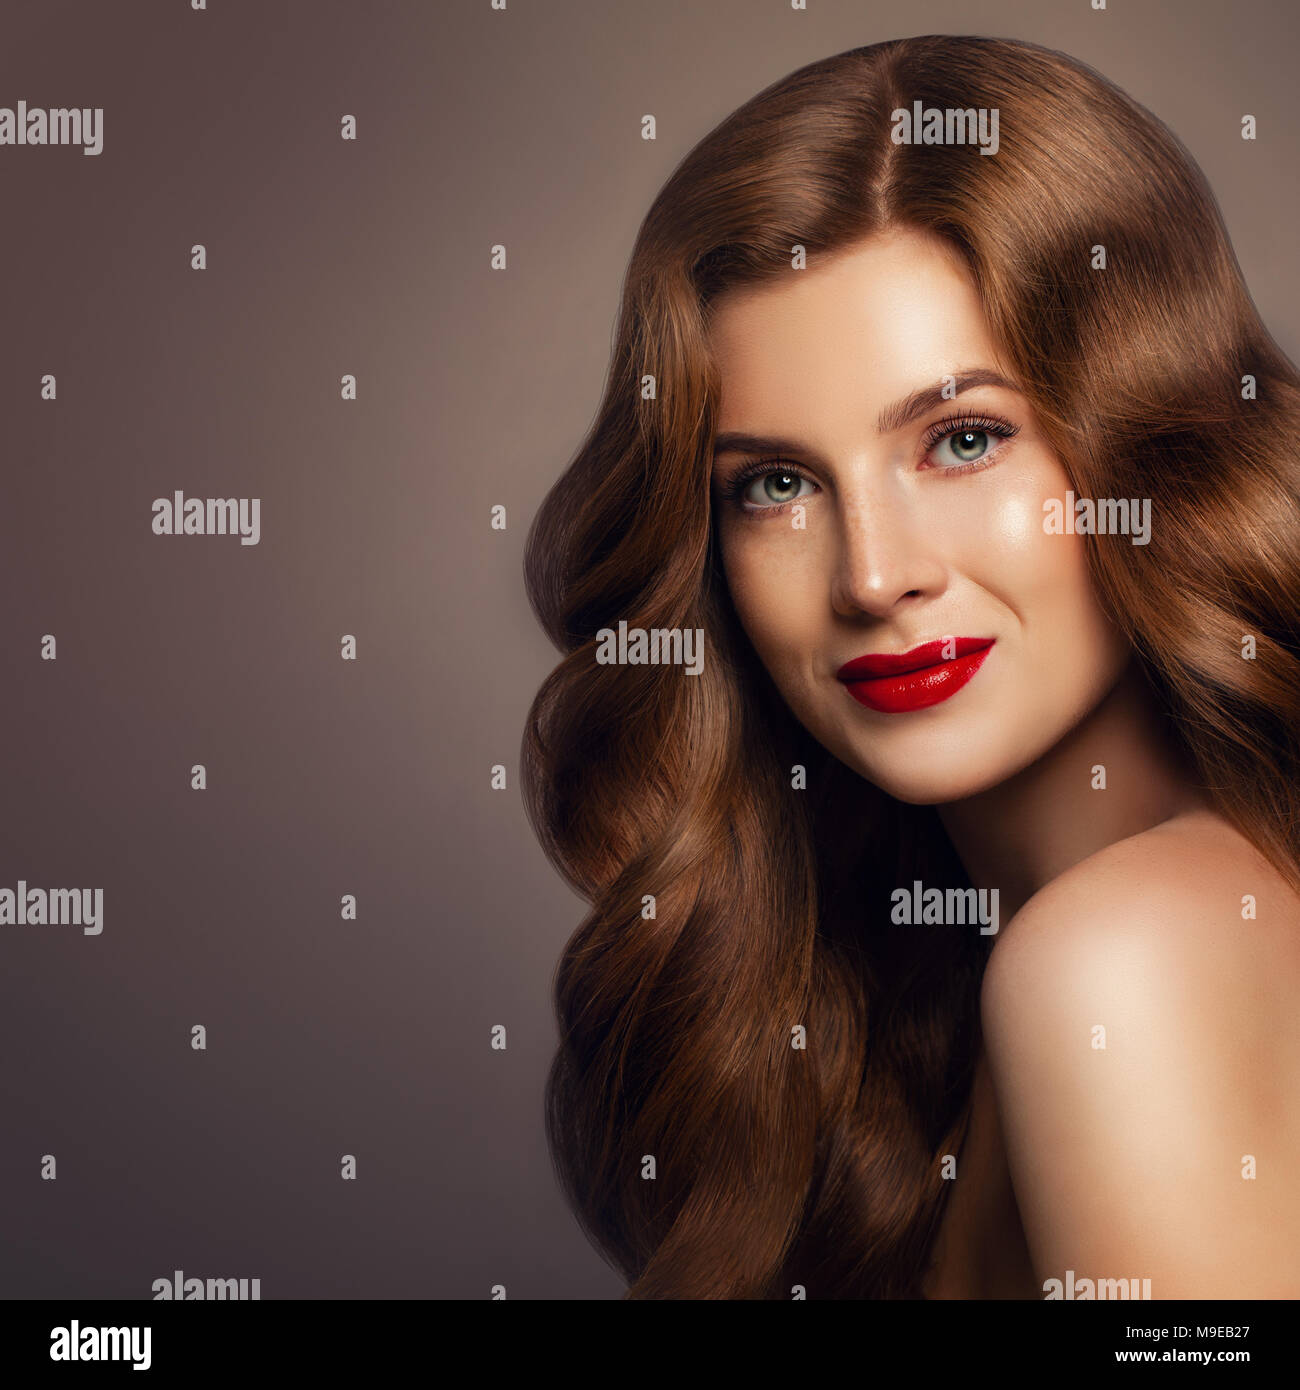 Haircare Concept. Beautiful Woman with Long Healthy Wavy Hairstyle. Girl with Colored Hair, Portrait Stock Photo